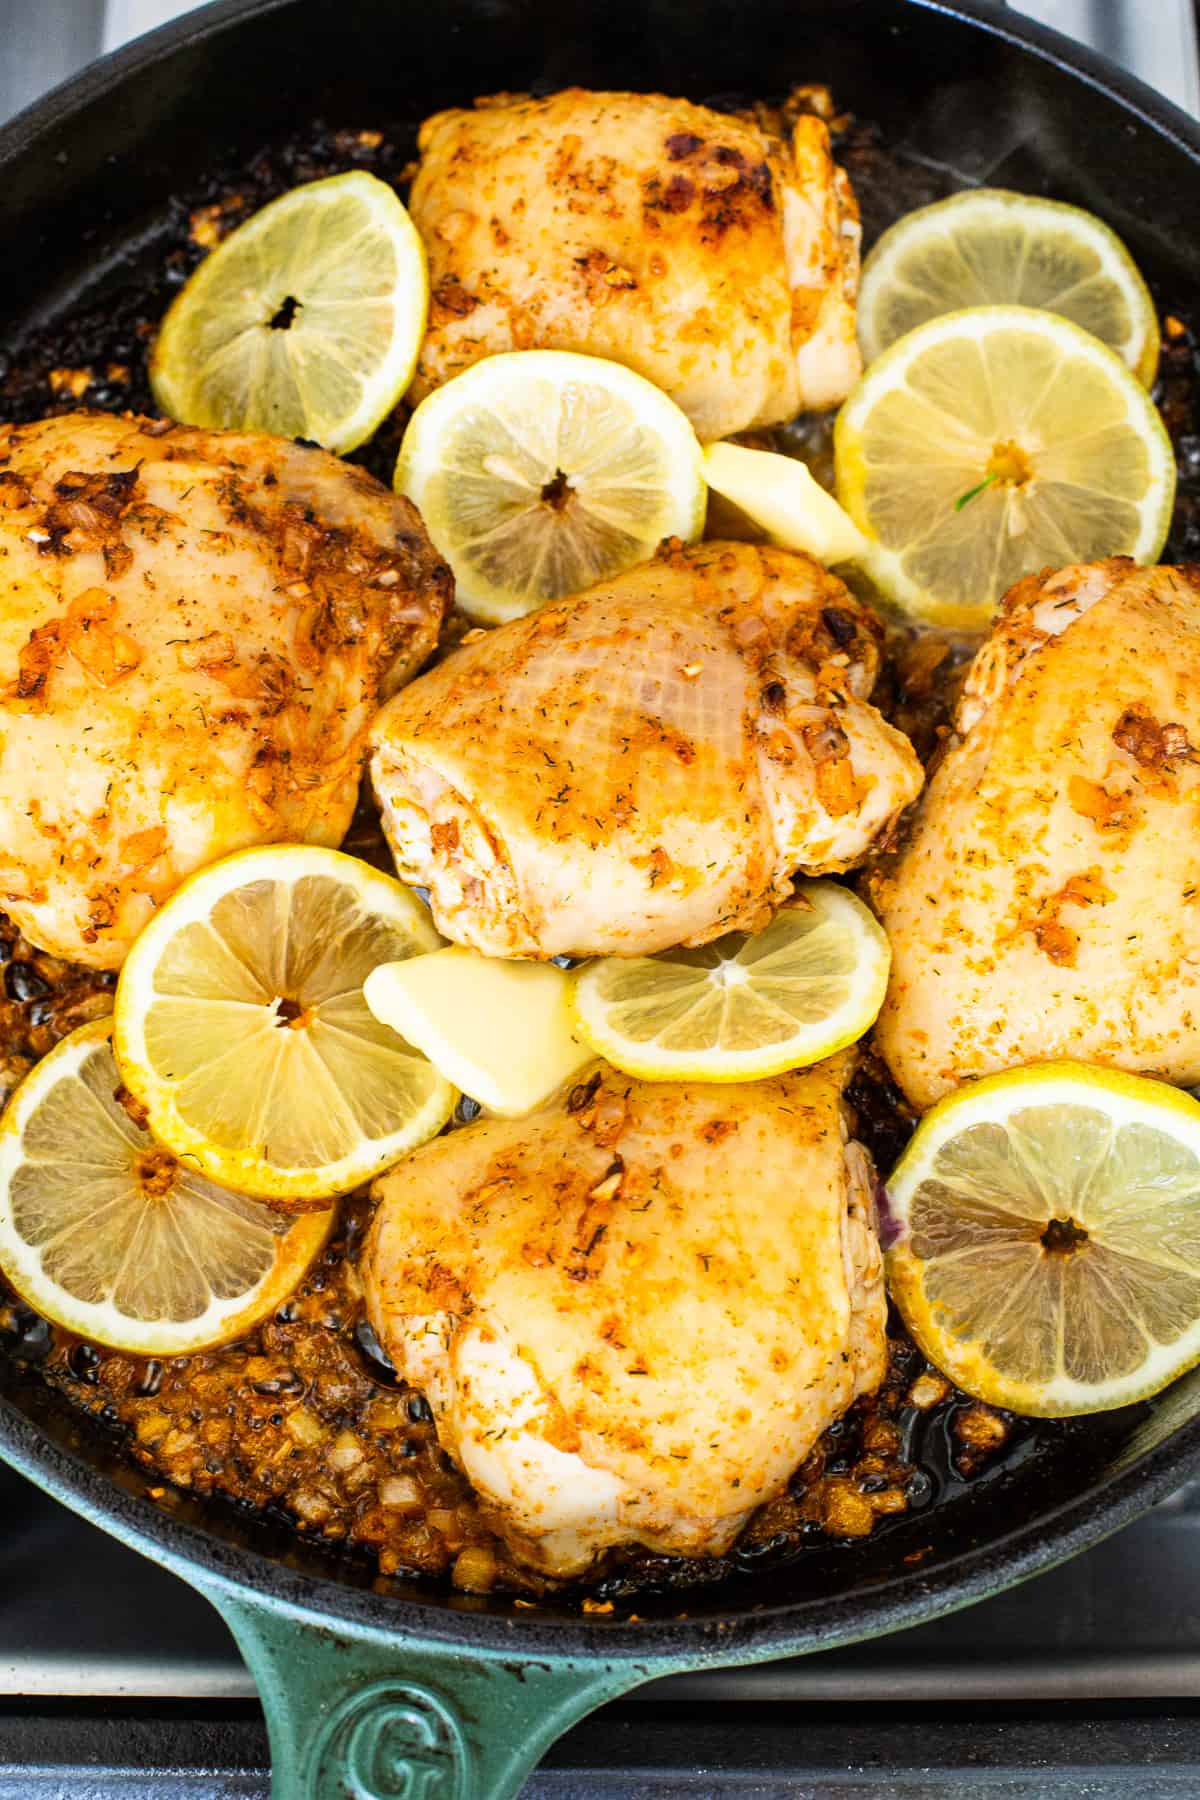 Chicken thighs in a skillet with lemon slices.